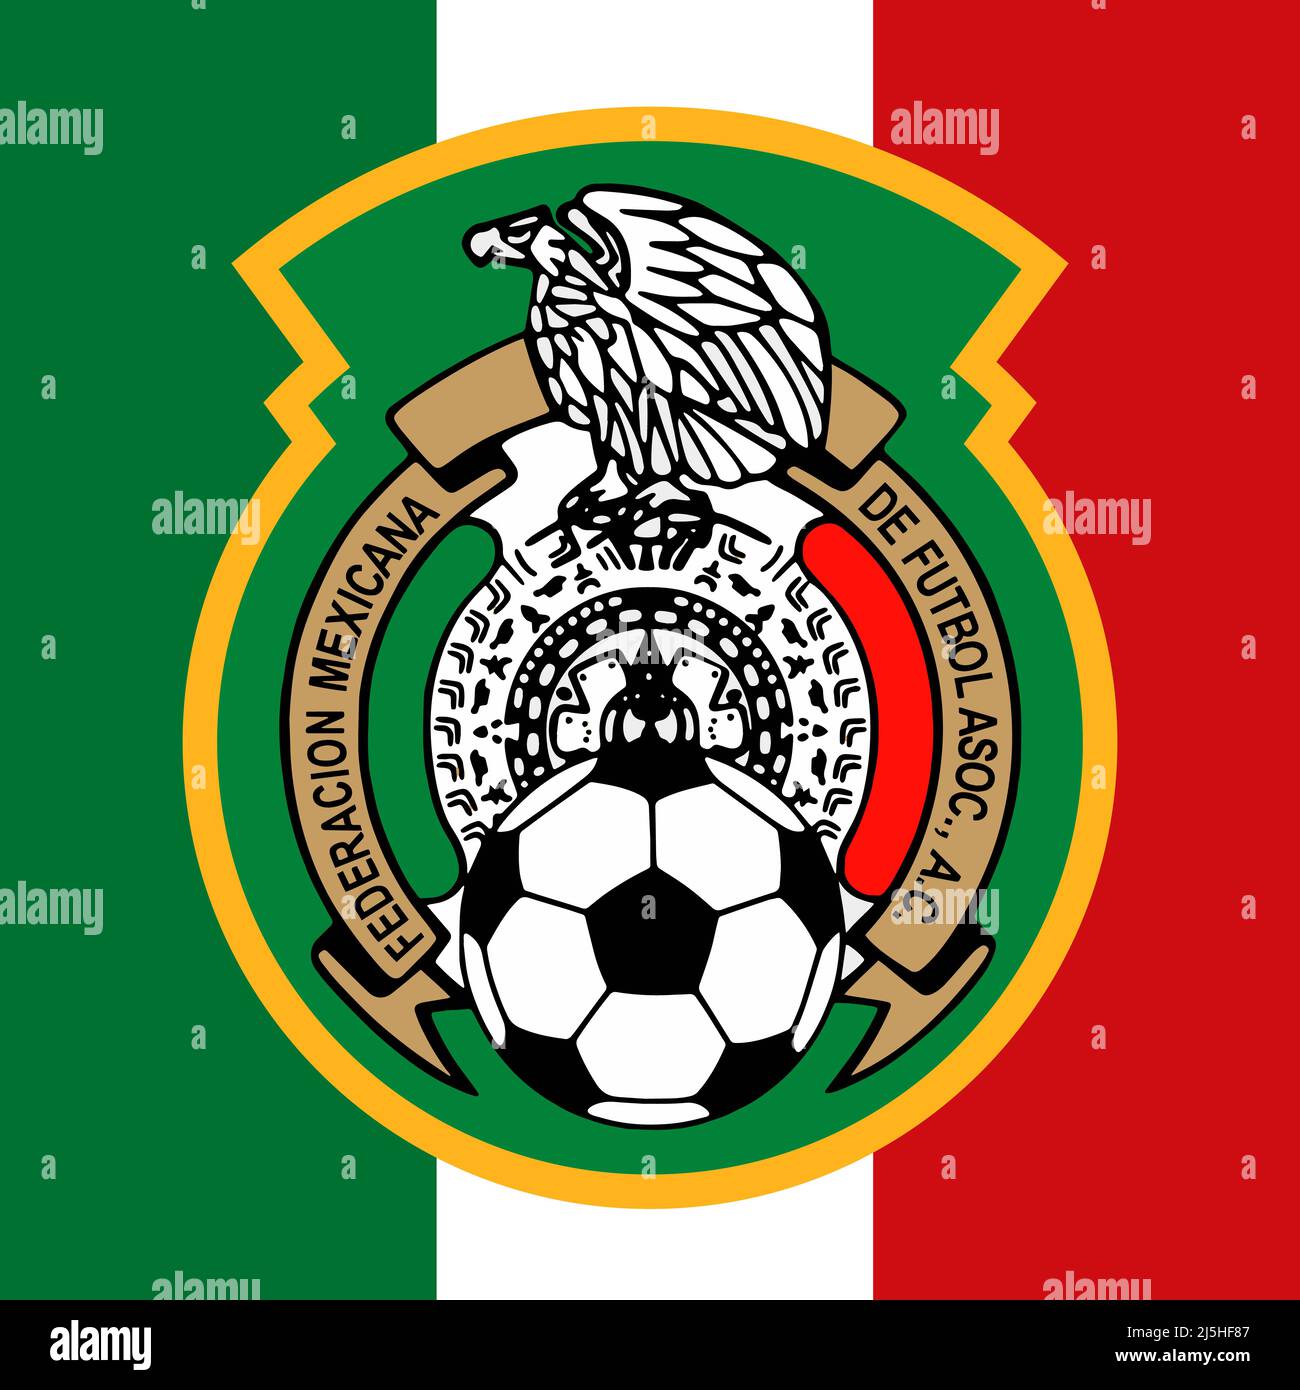 Mexico football federation logo with national flag, FIFA World Cup 2022, illustration Stock Photo